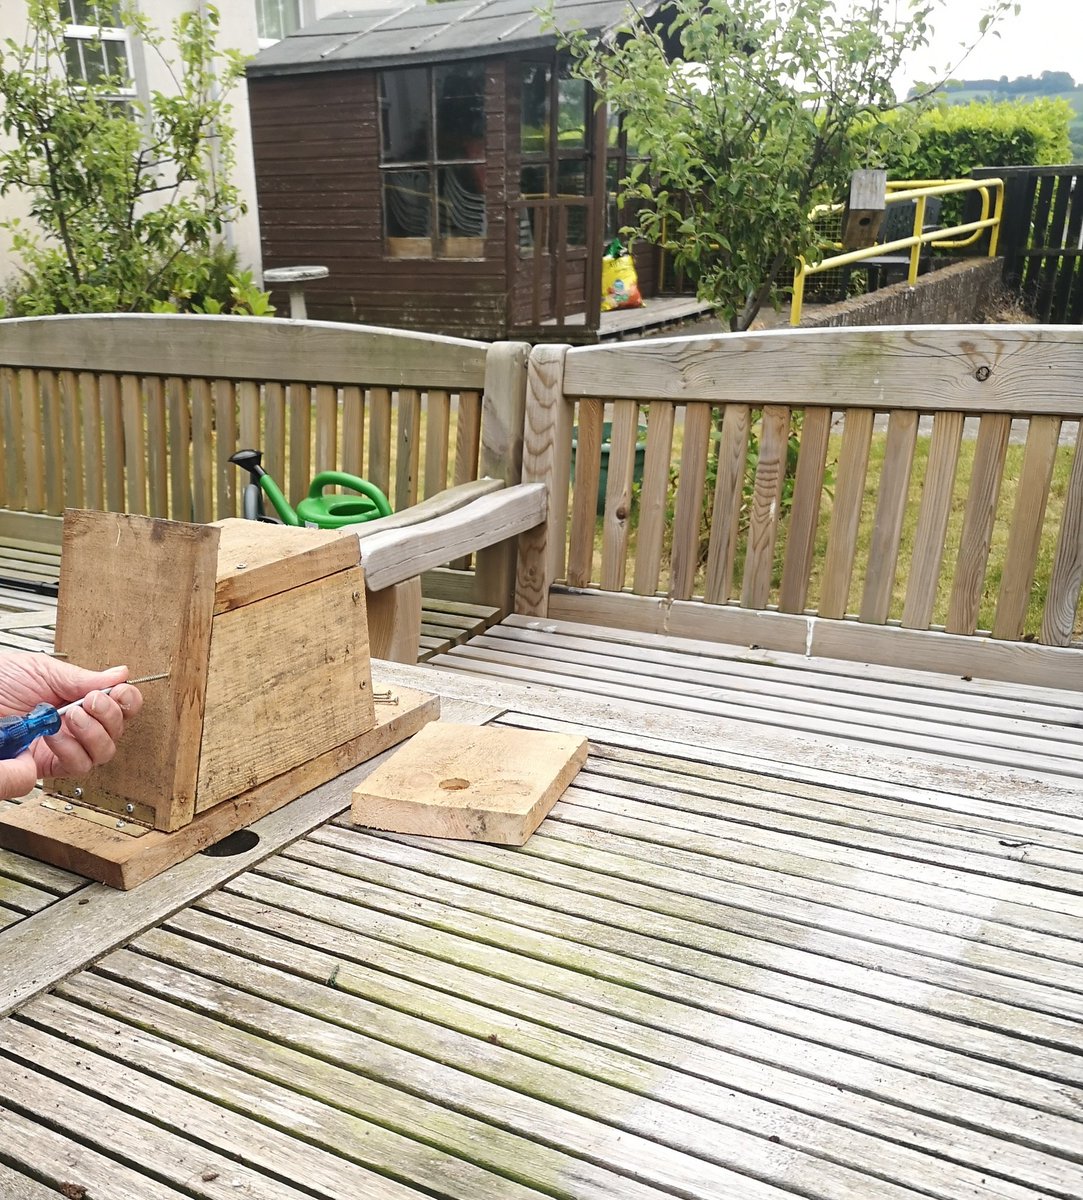 Working with a patient on the ward on a woodwork project. He enjoyed doing the manual work, he also enjoyed 'being my gaffer' when his hands got tired! 
#meaningful #DementiaAwarenessWeek2020
#OccupationalTherapy
@kerrylowe11 @nhsfife @jacquichung